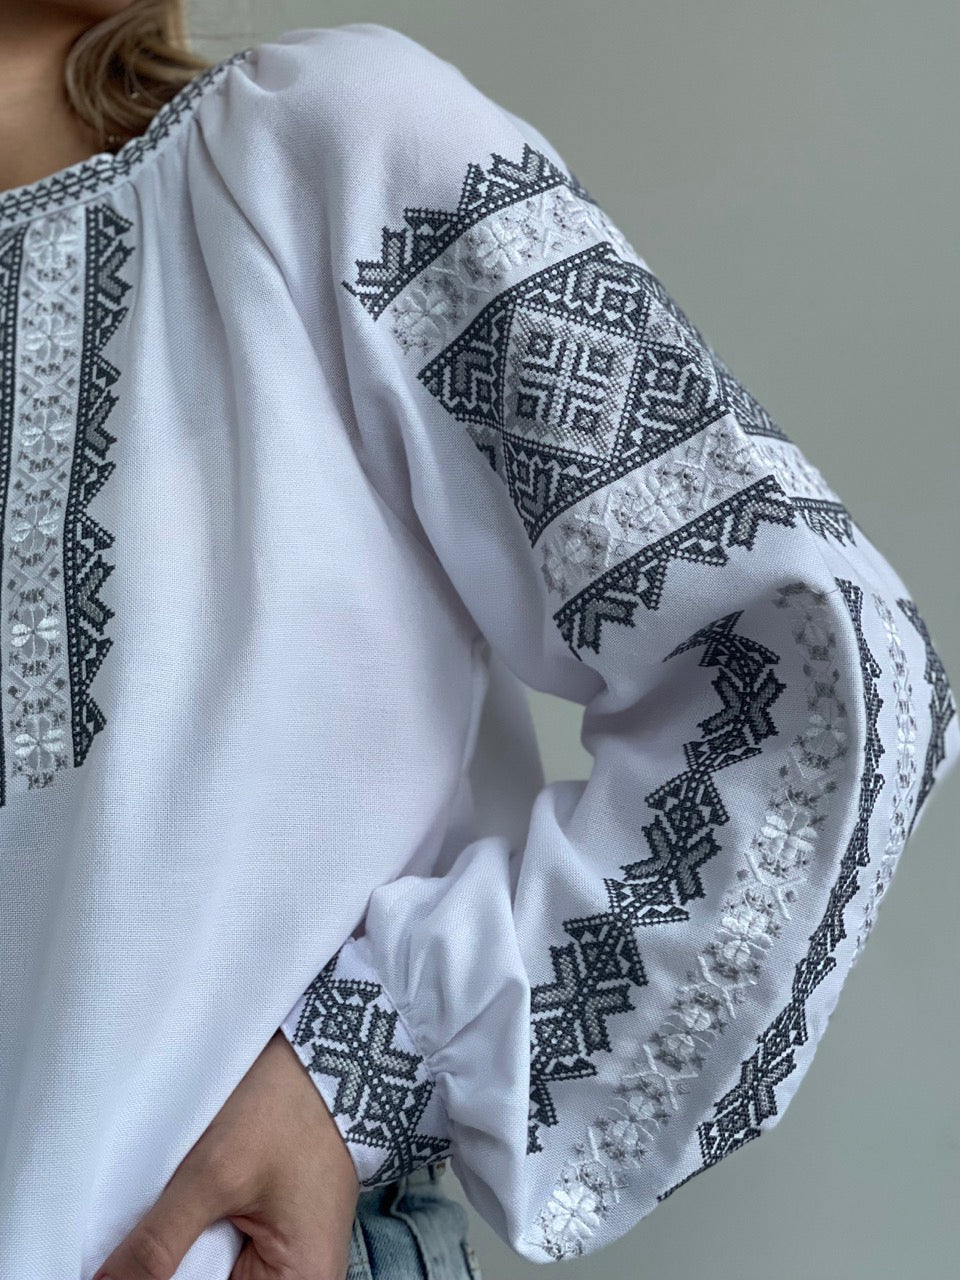 The White Blouse with Grey Embroidery